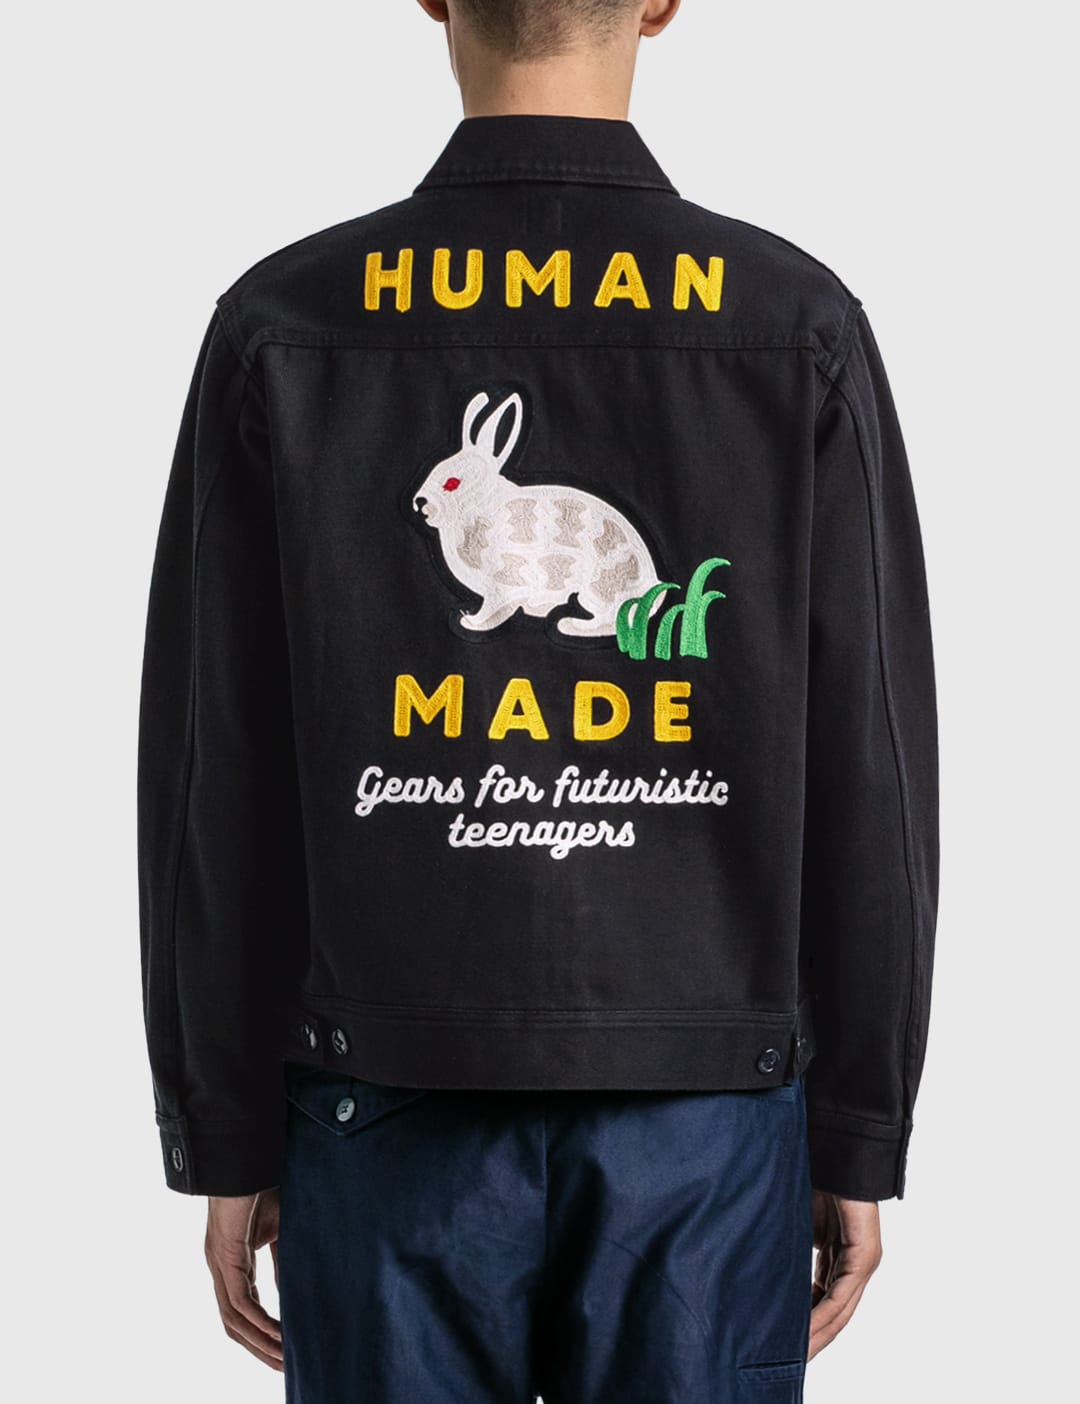 Human Made - Zip Work Jacket | HBX - Globally Curated Fashion and 